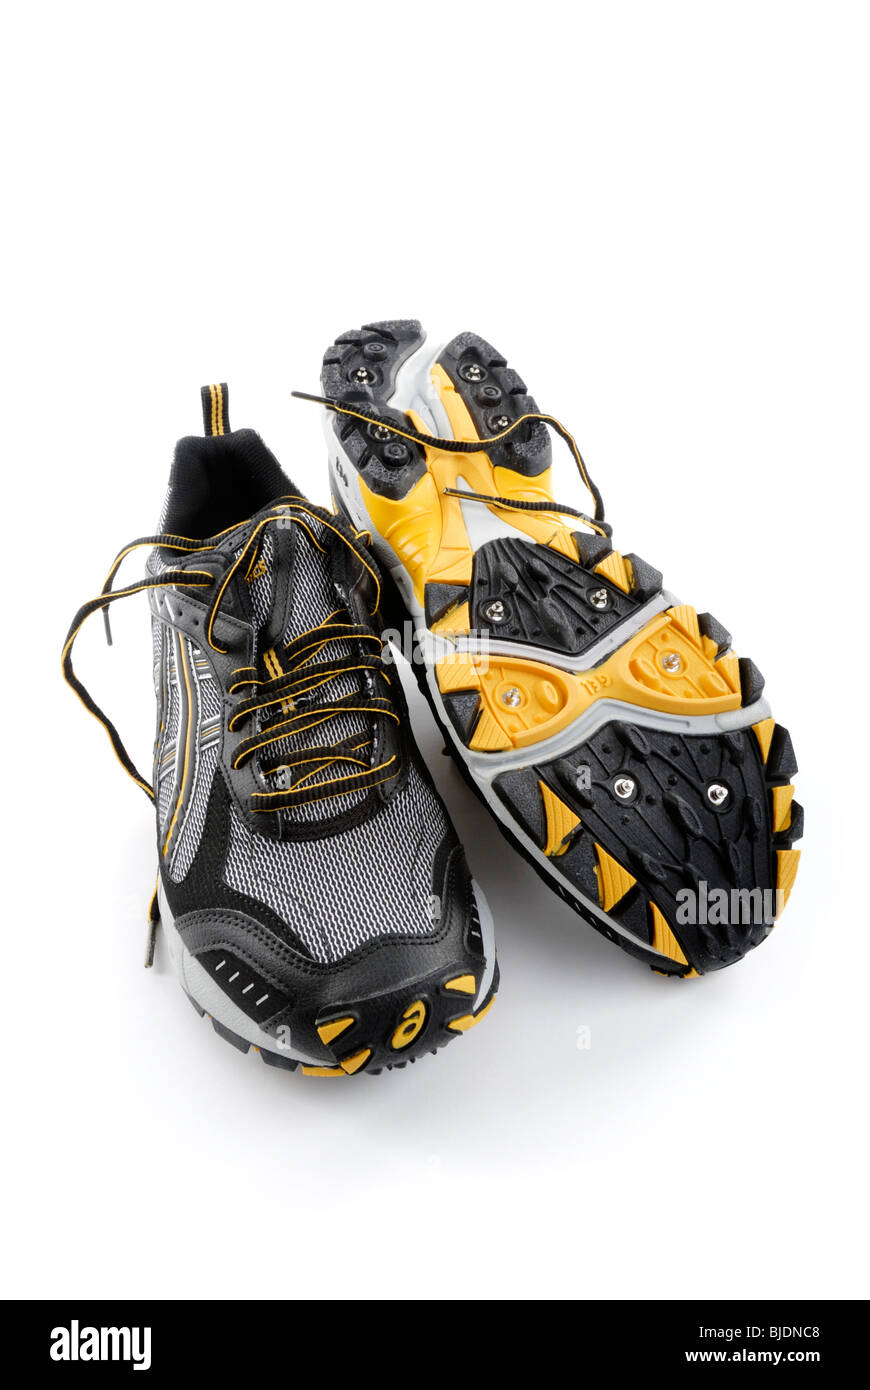 https://c8.alamy.com/comp/BJDNC8/water-proof-running-shoes-with-spikes-for-traction-on-snow-and-ice-BJDNC8.jpg